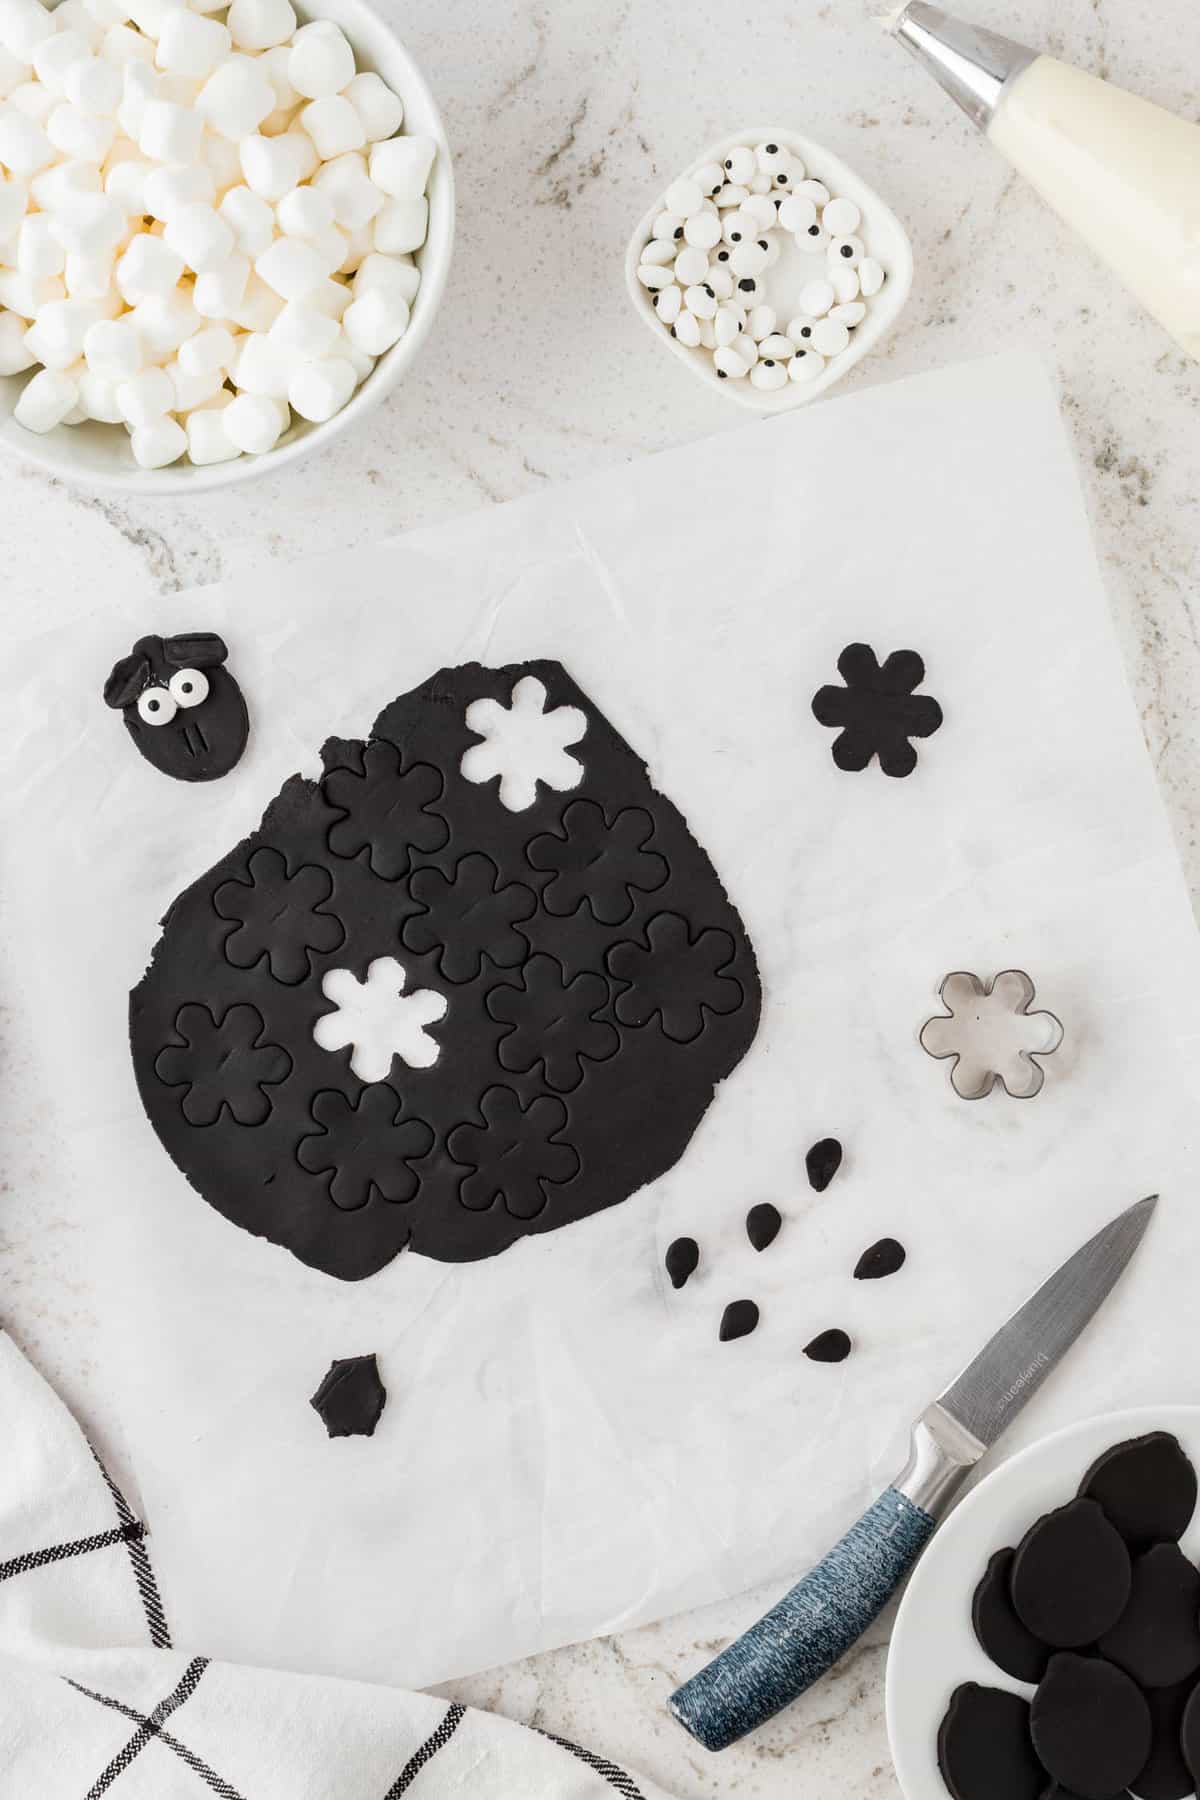 Next, use a small snowflake cookie cutter to make the sheep's ears and modified their shape by cutting and molding.